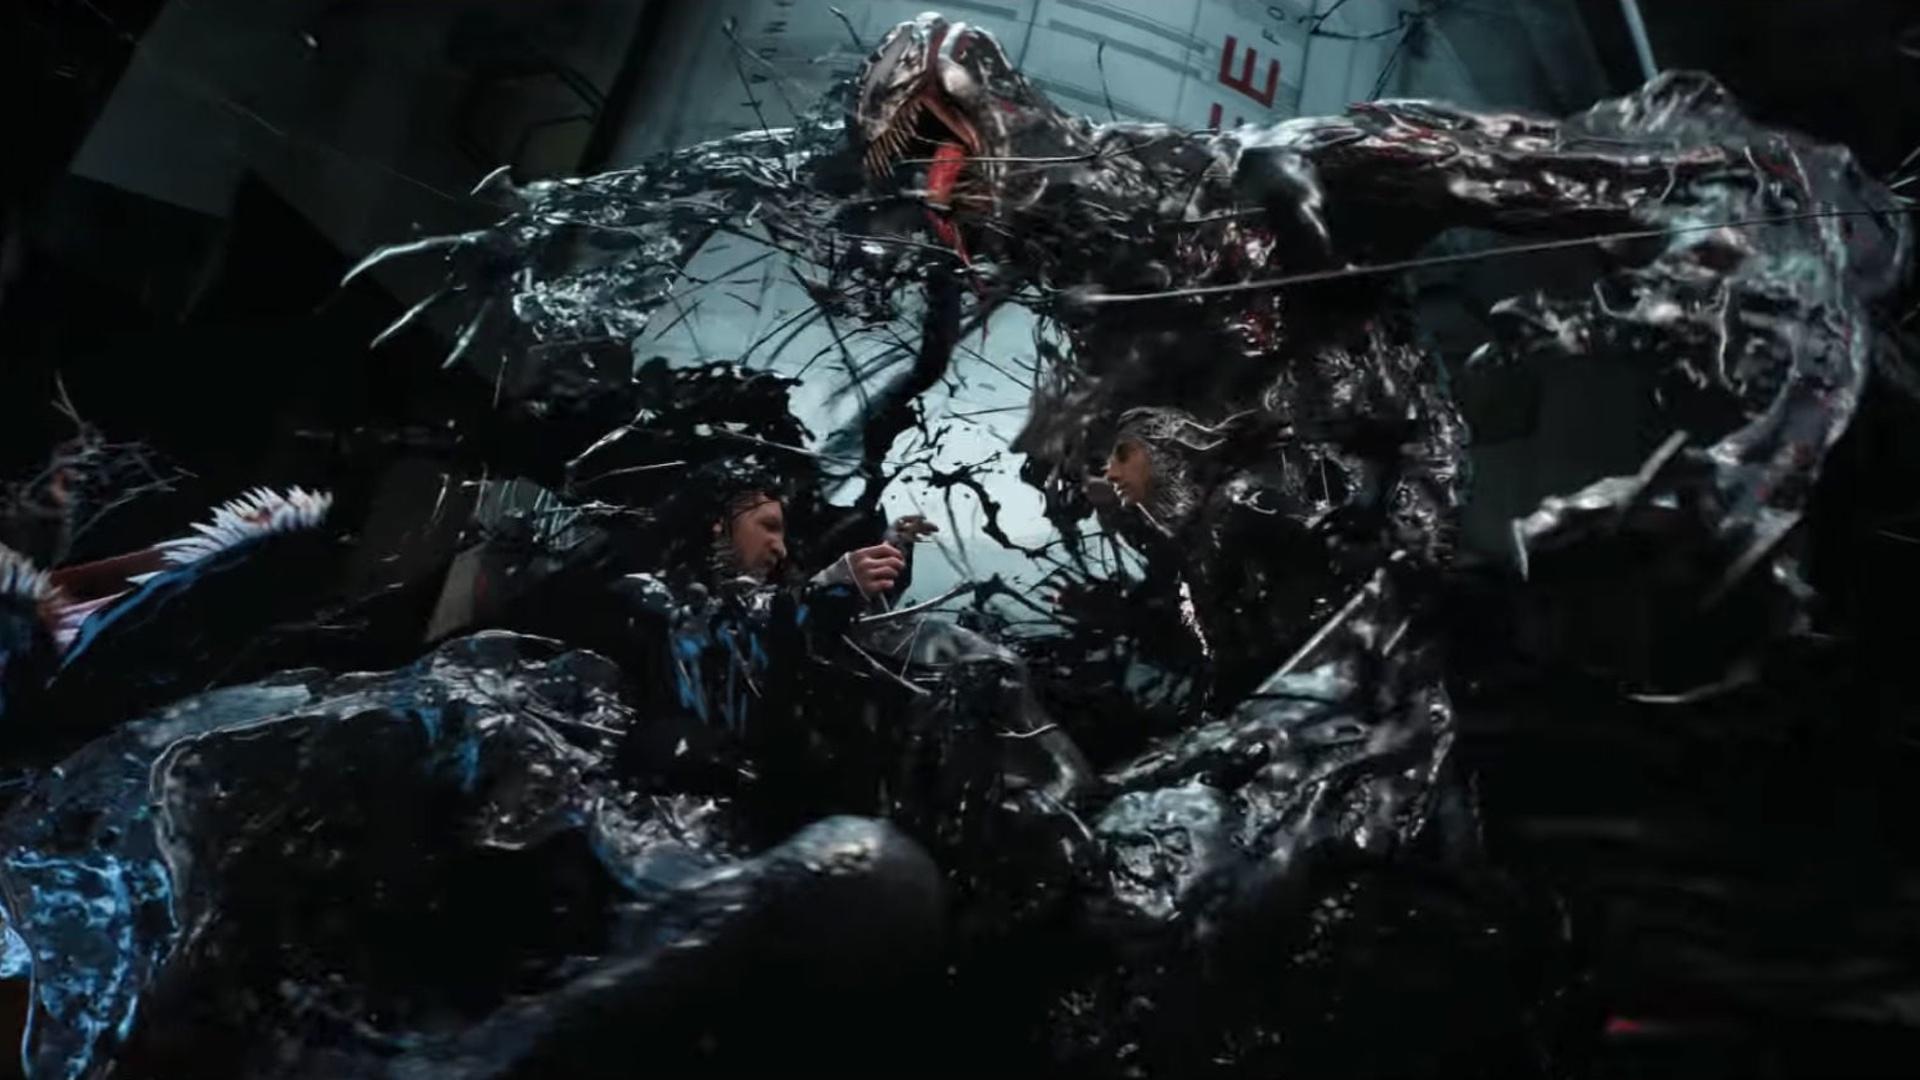 Cool Concept Art From VENOM Shows an Unused Scene and a